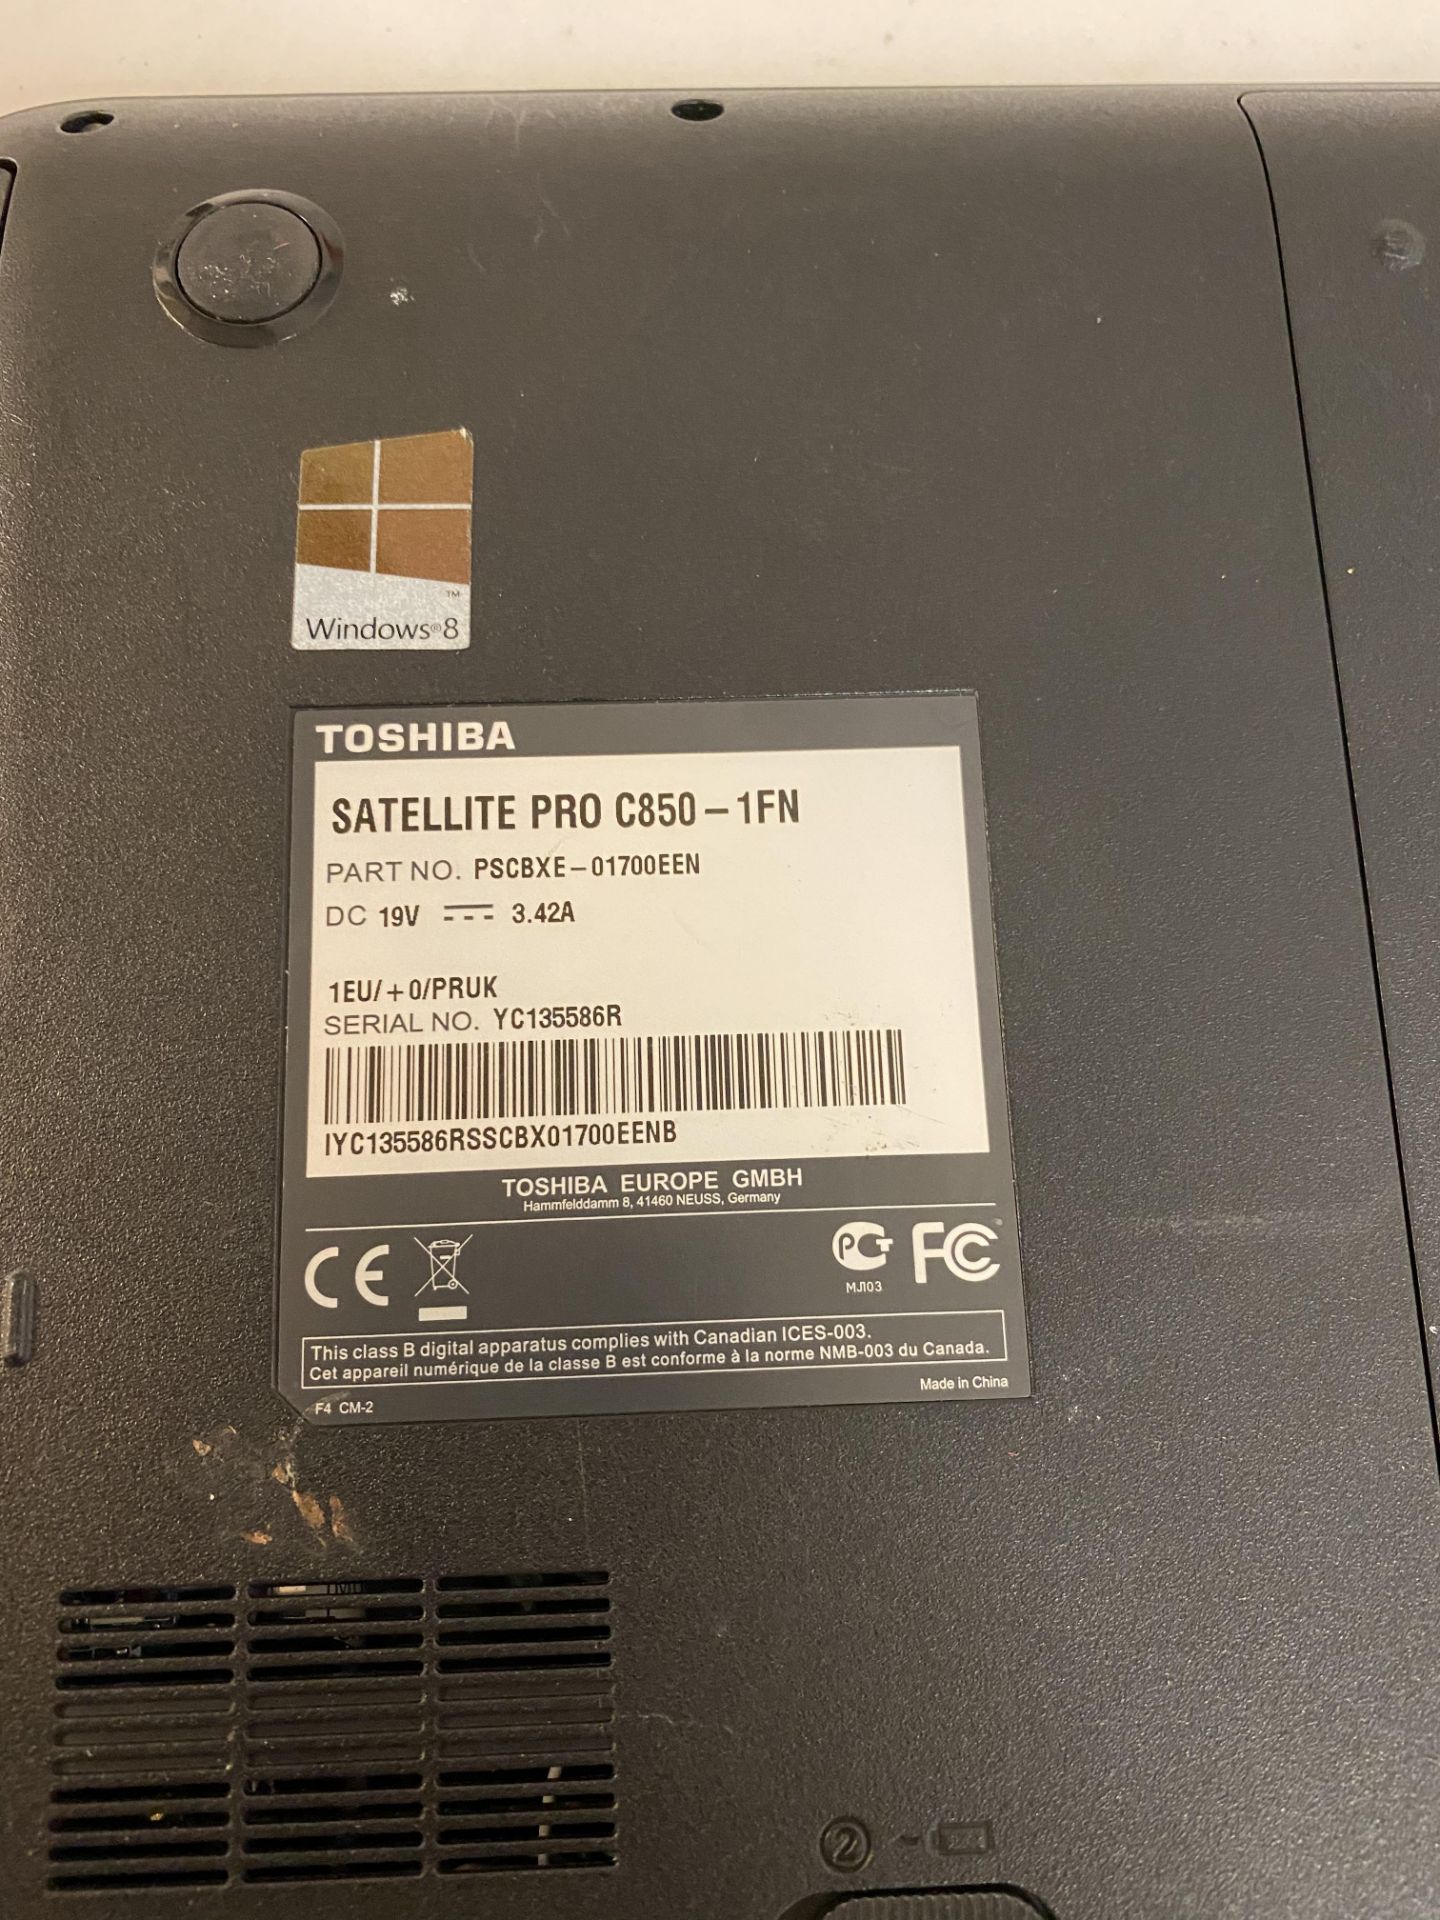 Toshiba Satellite Pro C850 15.6 inch Laptop (no power cable/ charger, cannot test) - Image 2 of 2